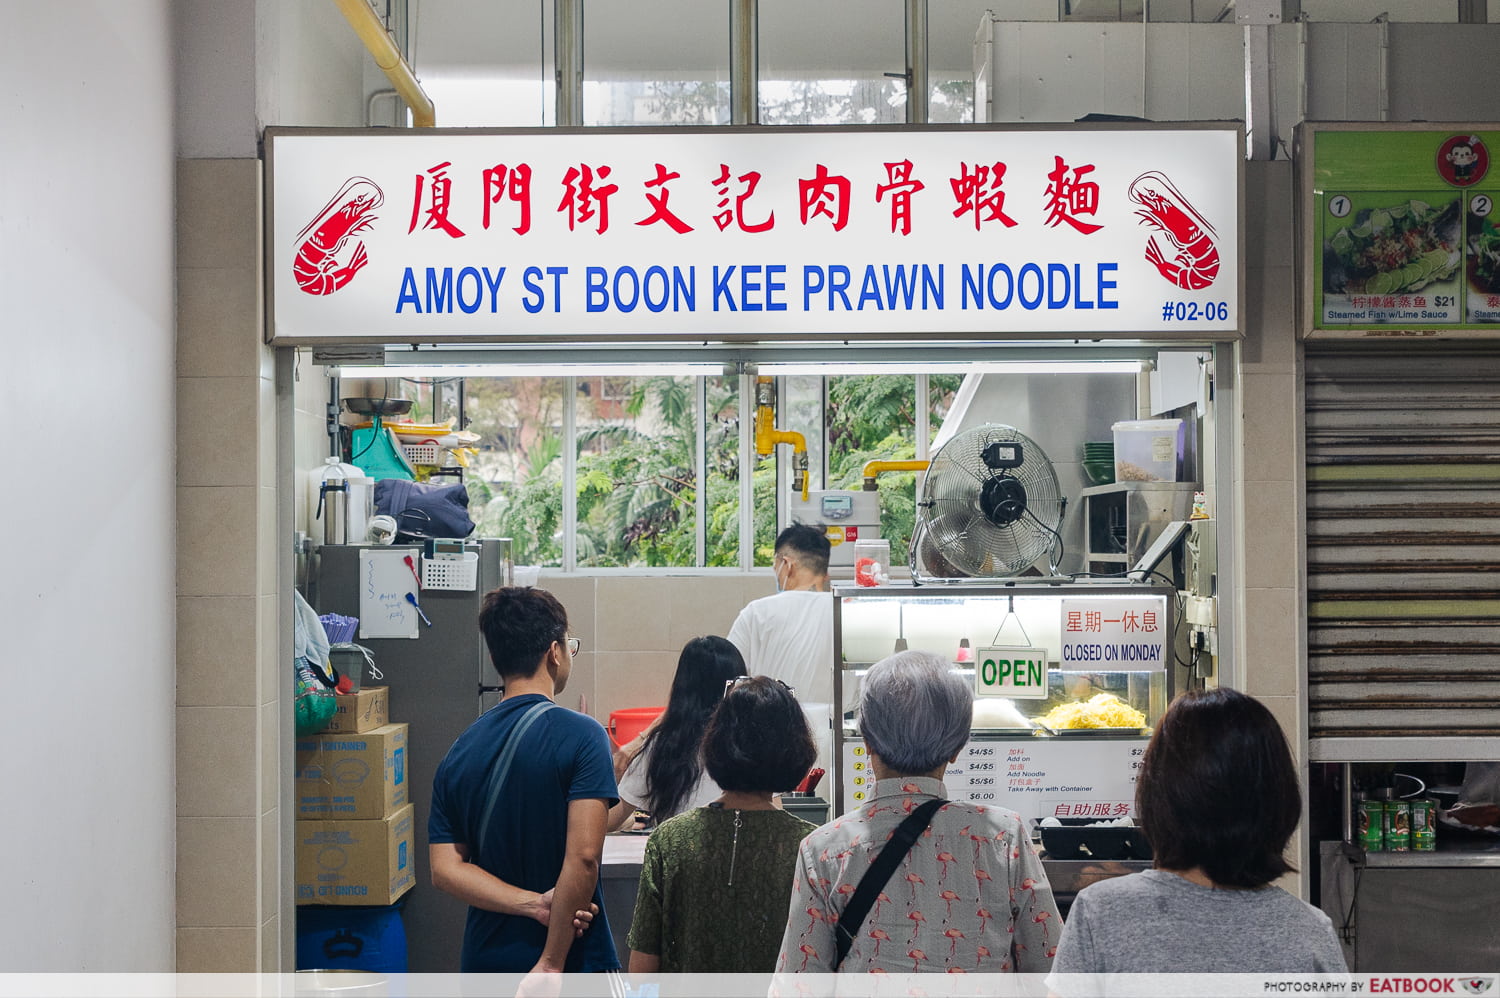 Amoy_Street_Boon_Kee_Prawn_Noodle_Stallfront